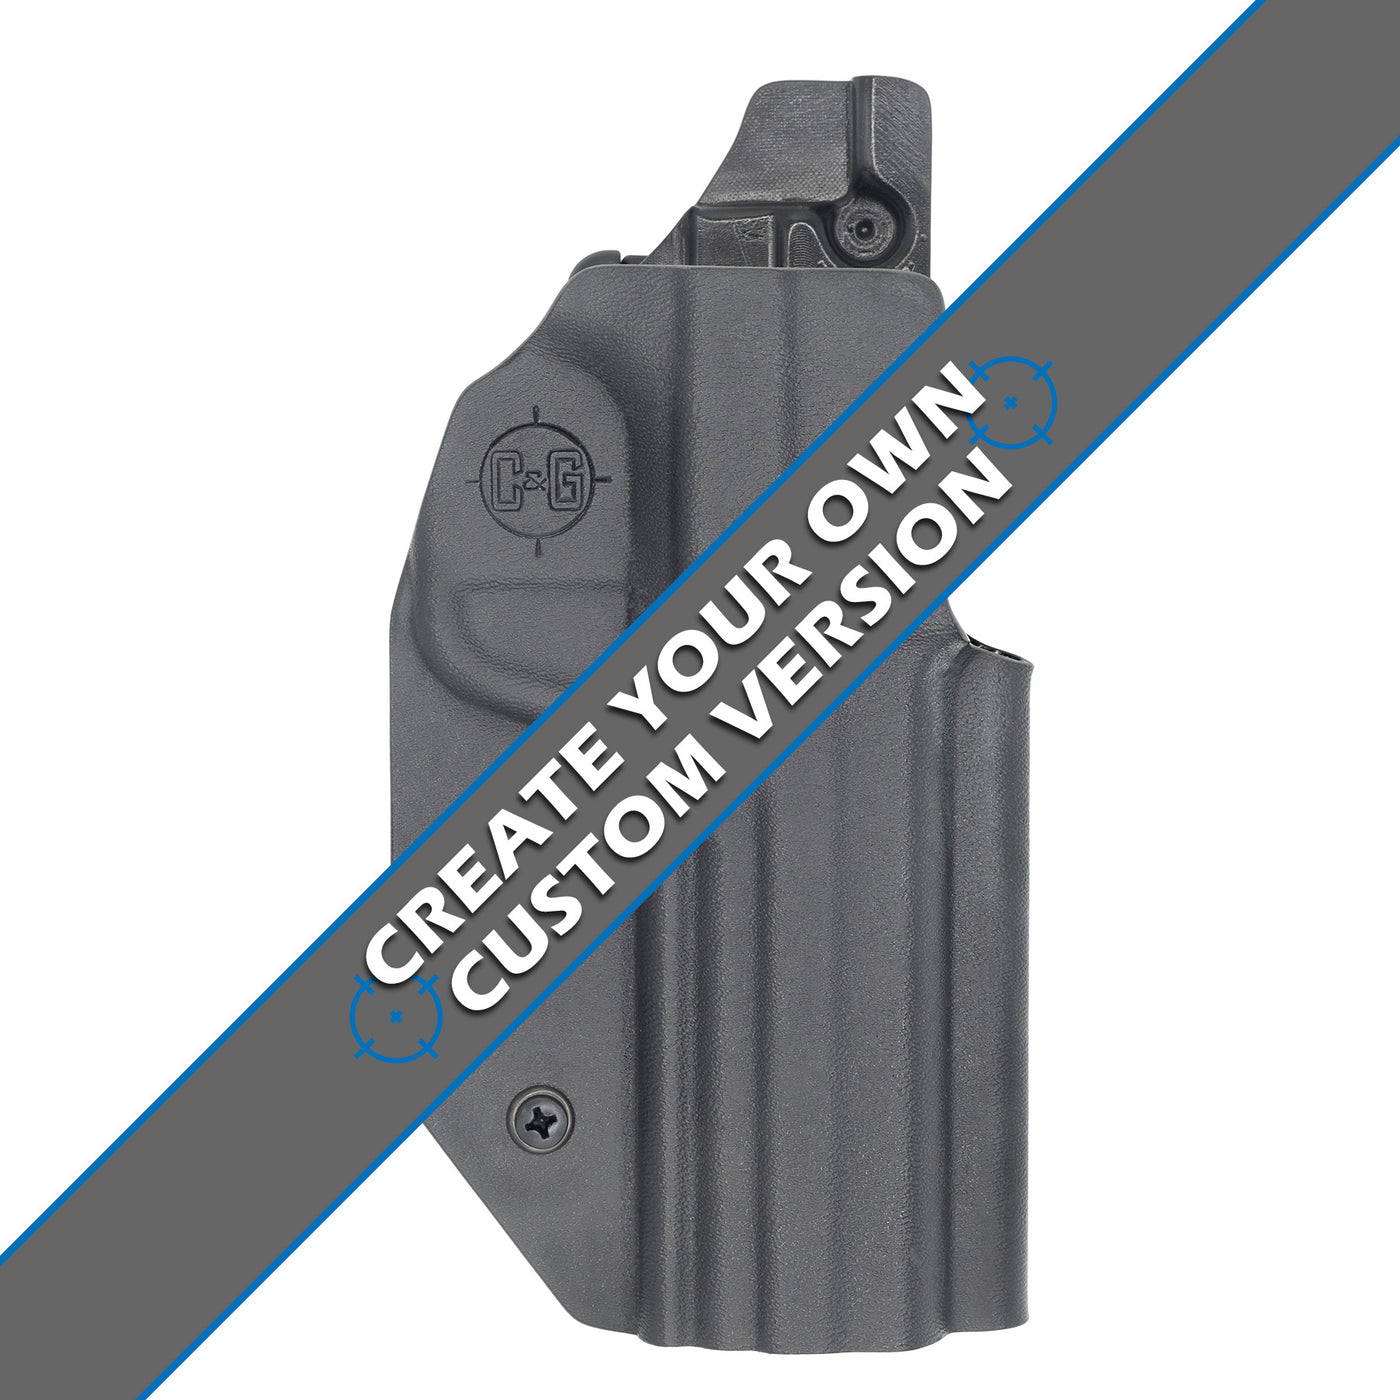 C&G Holsters custom Competition Holster that is IDPA, USPSA & 3-GUN legal for Smith and Wesson M&P 5" 9 40